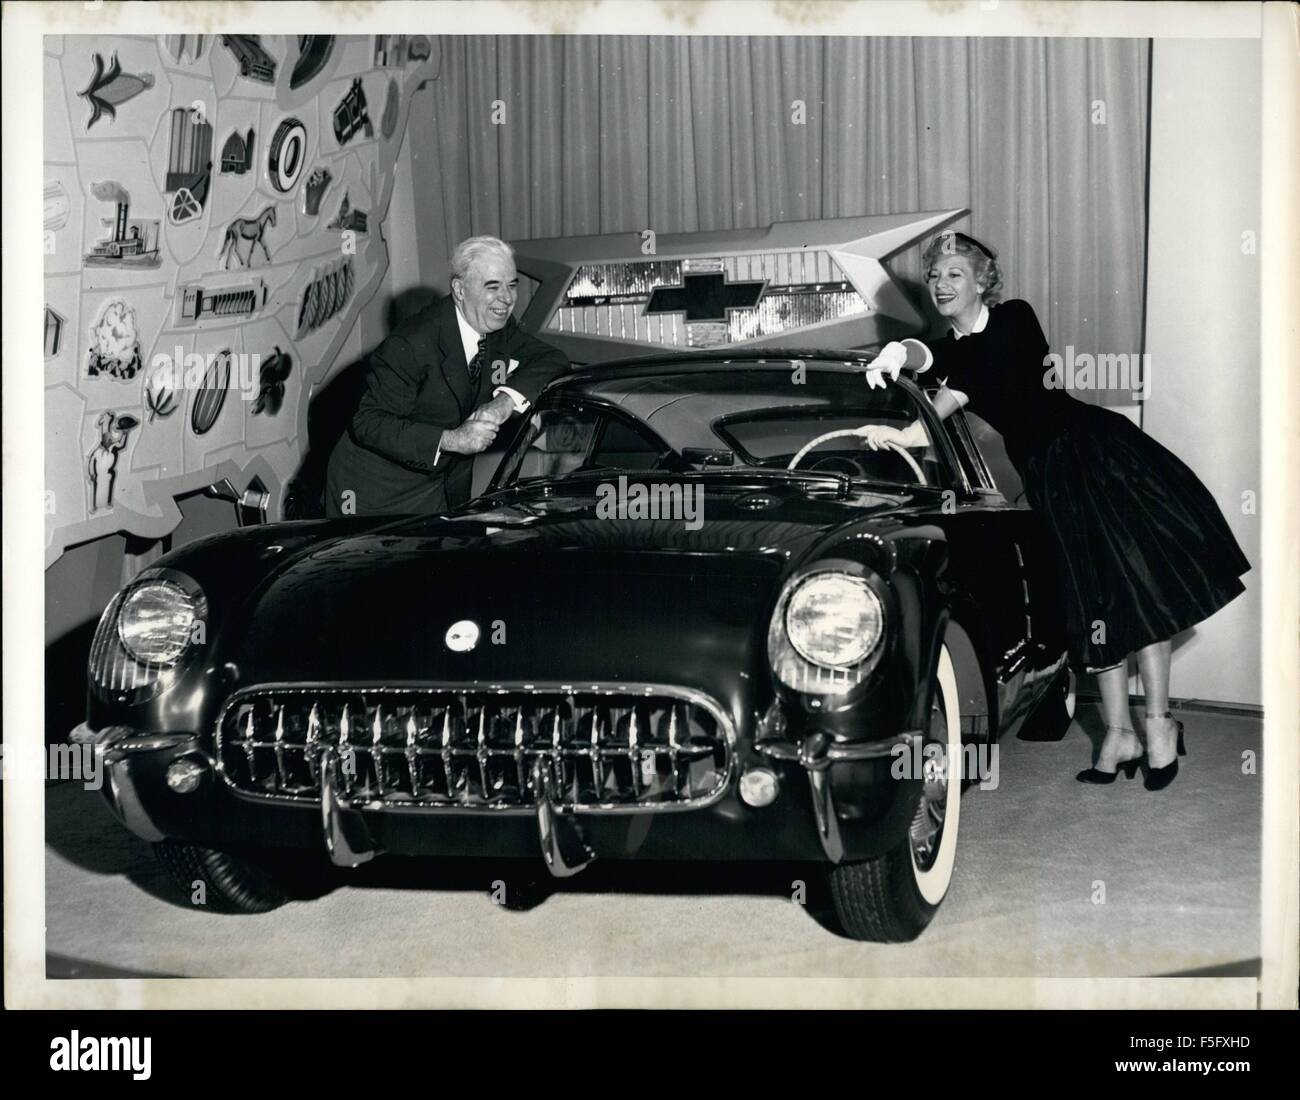 1968 - General Motors Motorama of 1954 opened in New York at the Waldorf Astoria with H.H. Curtice, GM President, who announced a one billion dollar GM expansion program, as host. Attending were Dinah Shore, shown here with T.H. Keating, General Manager of the Chevrolet Division, examining Chevrolet's Corvette ''Corvair'' coup&eacute; one of the 11 ''dream'' cars introduced at the show. © Keystone Pictures USA/ZUMAPRESS.com/Alamy Live News Stock Photo